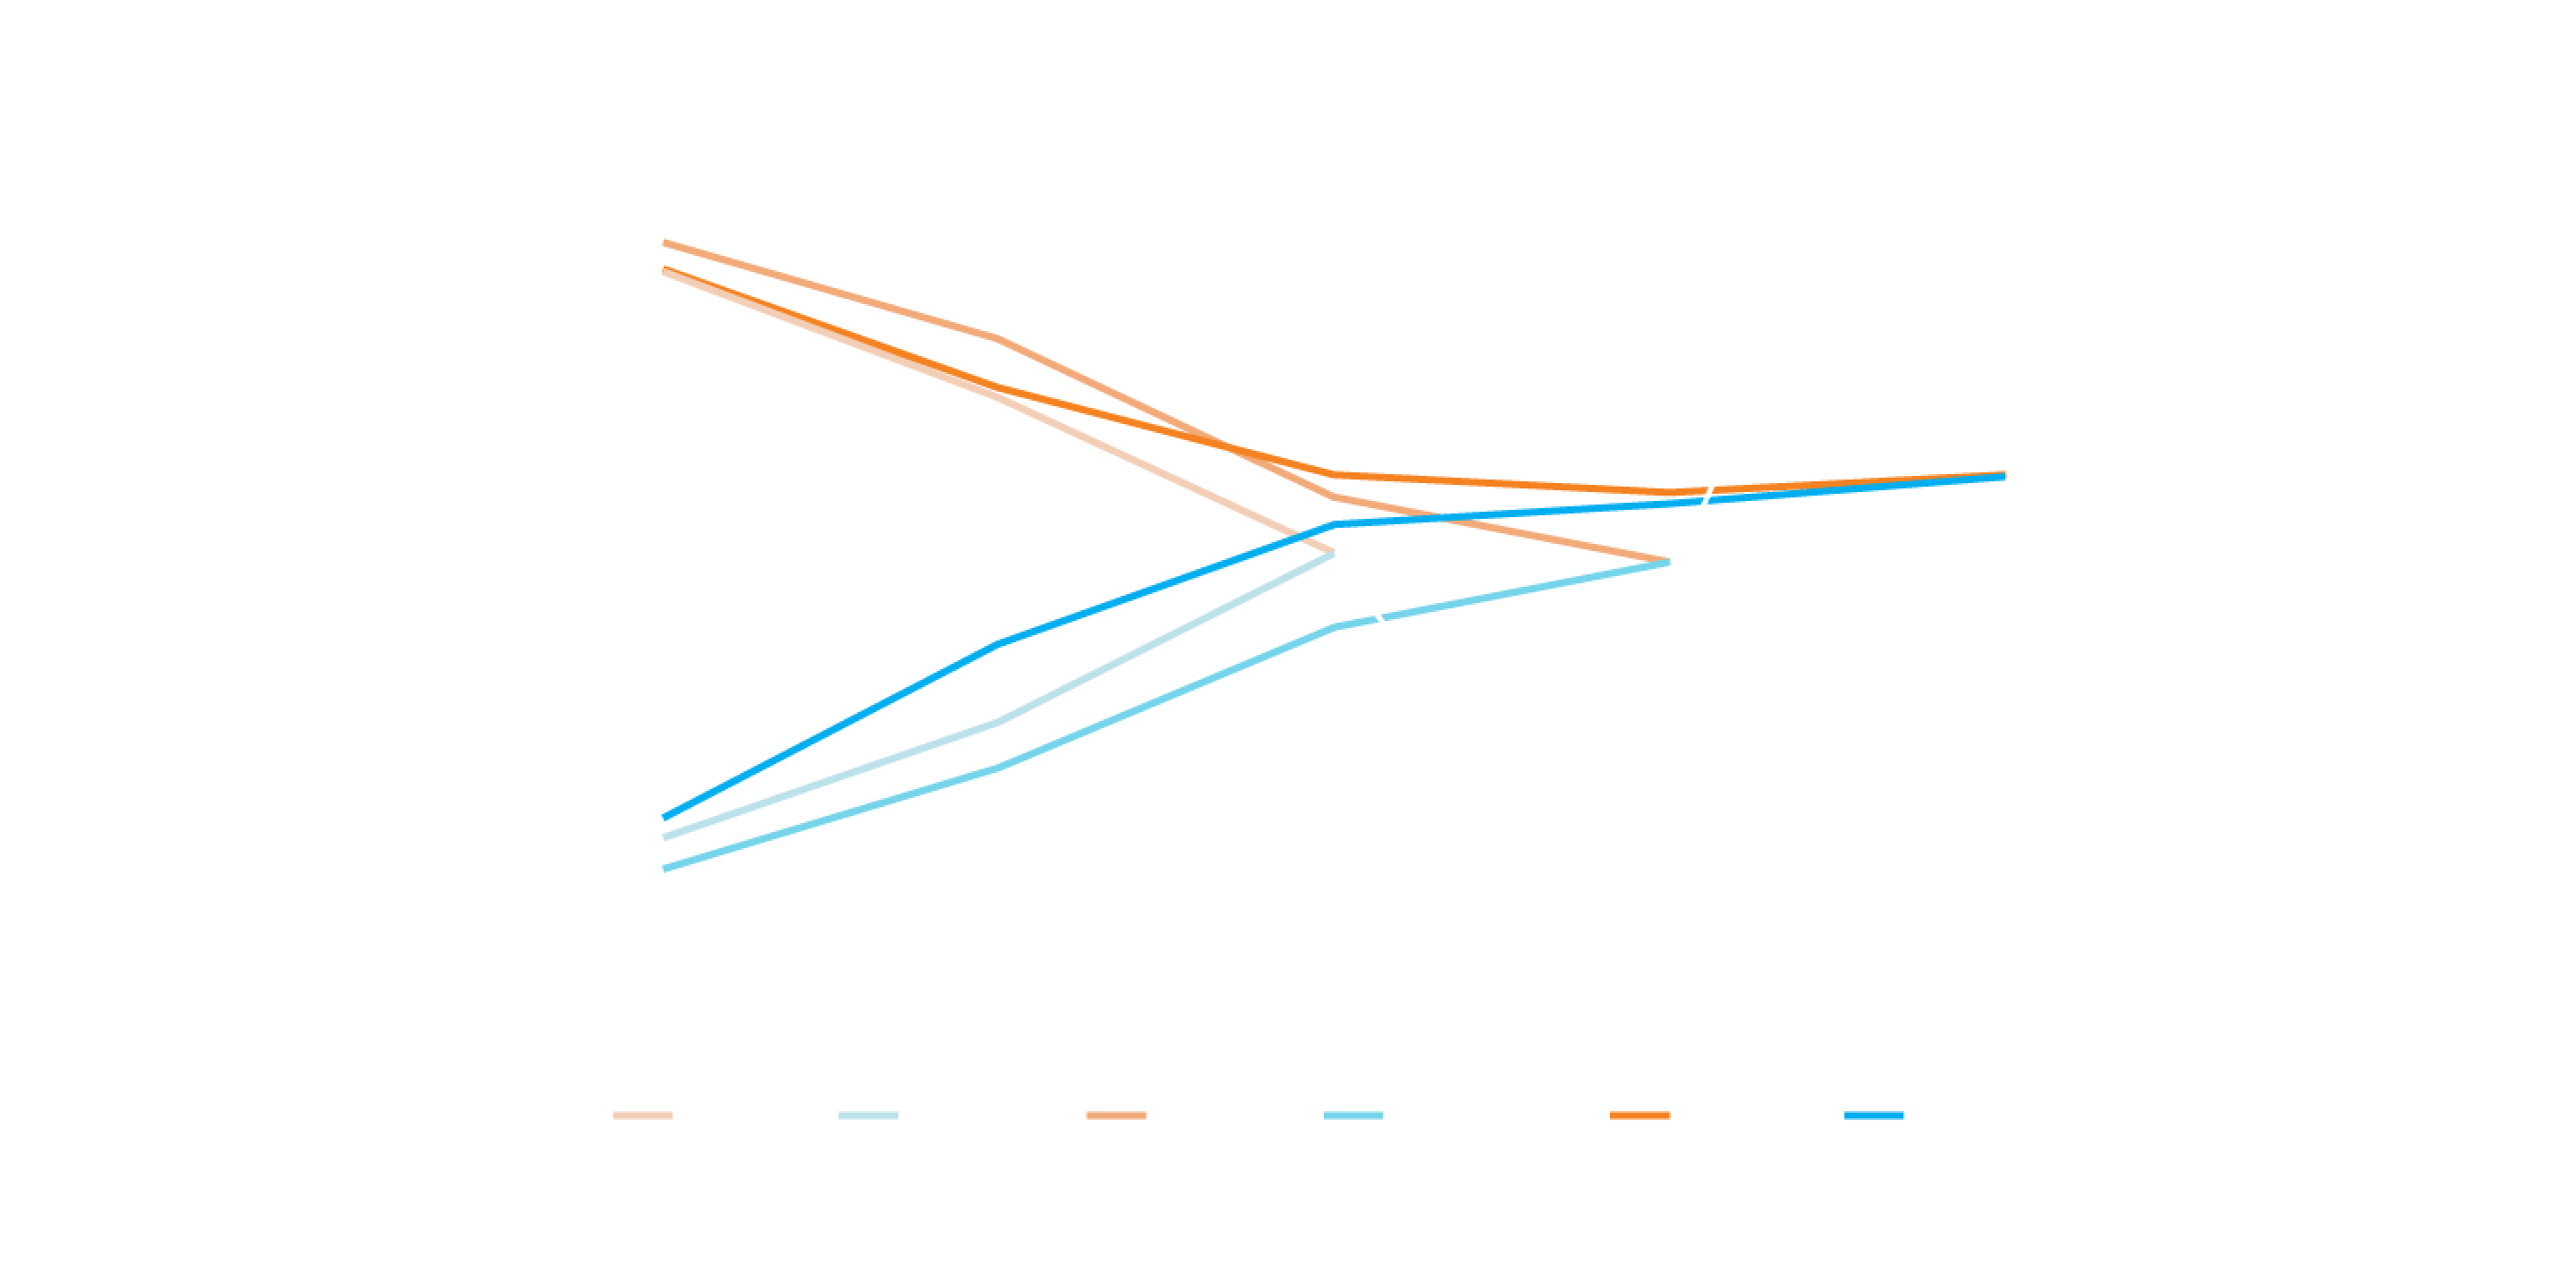 A multiple line graph comparing the Average 25+ gauge duty cycle of various ULTRAVIT probes at their maximum cut rates. The 10K Advanced ULTRAVIT Probe showed a 22-24% significant increase in duty cycle compared to the 7.5K ULTRAVIT Probe in core duty cycle mode. The 10K Advanced ULTRAVIT Probe showed a 18-20% significant increase in duty cycle compared to the 5K ULTRAVIT Probe in shave vitrectomy mode.